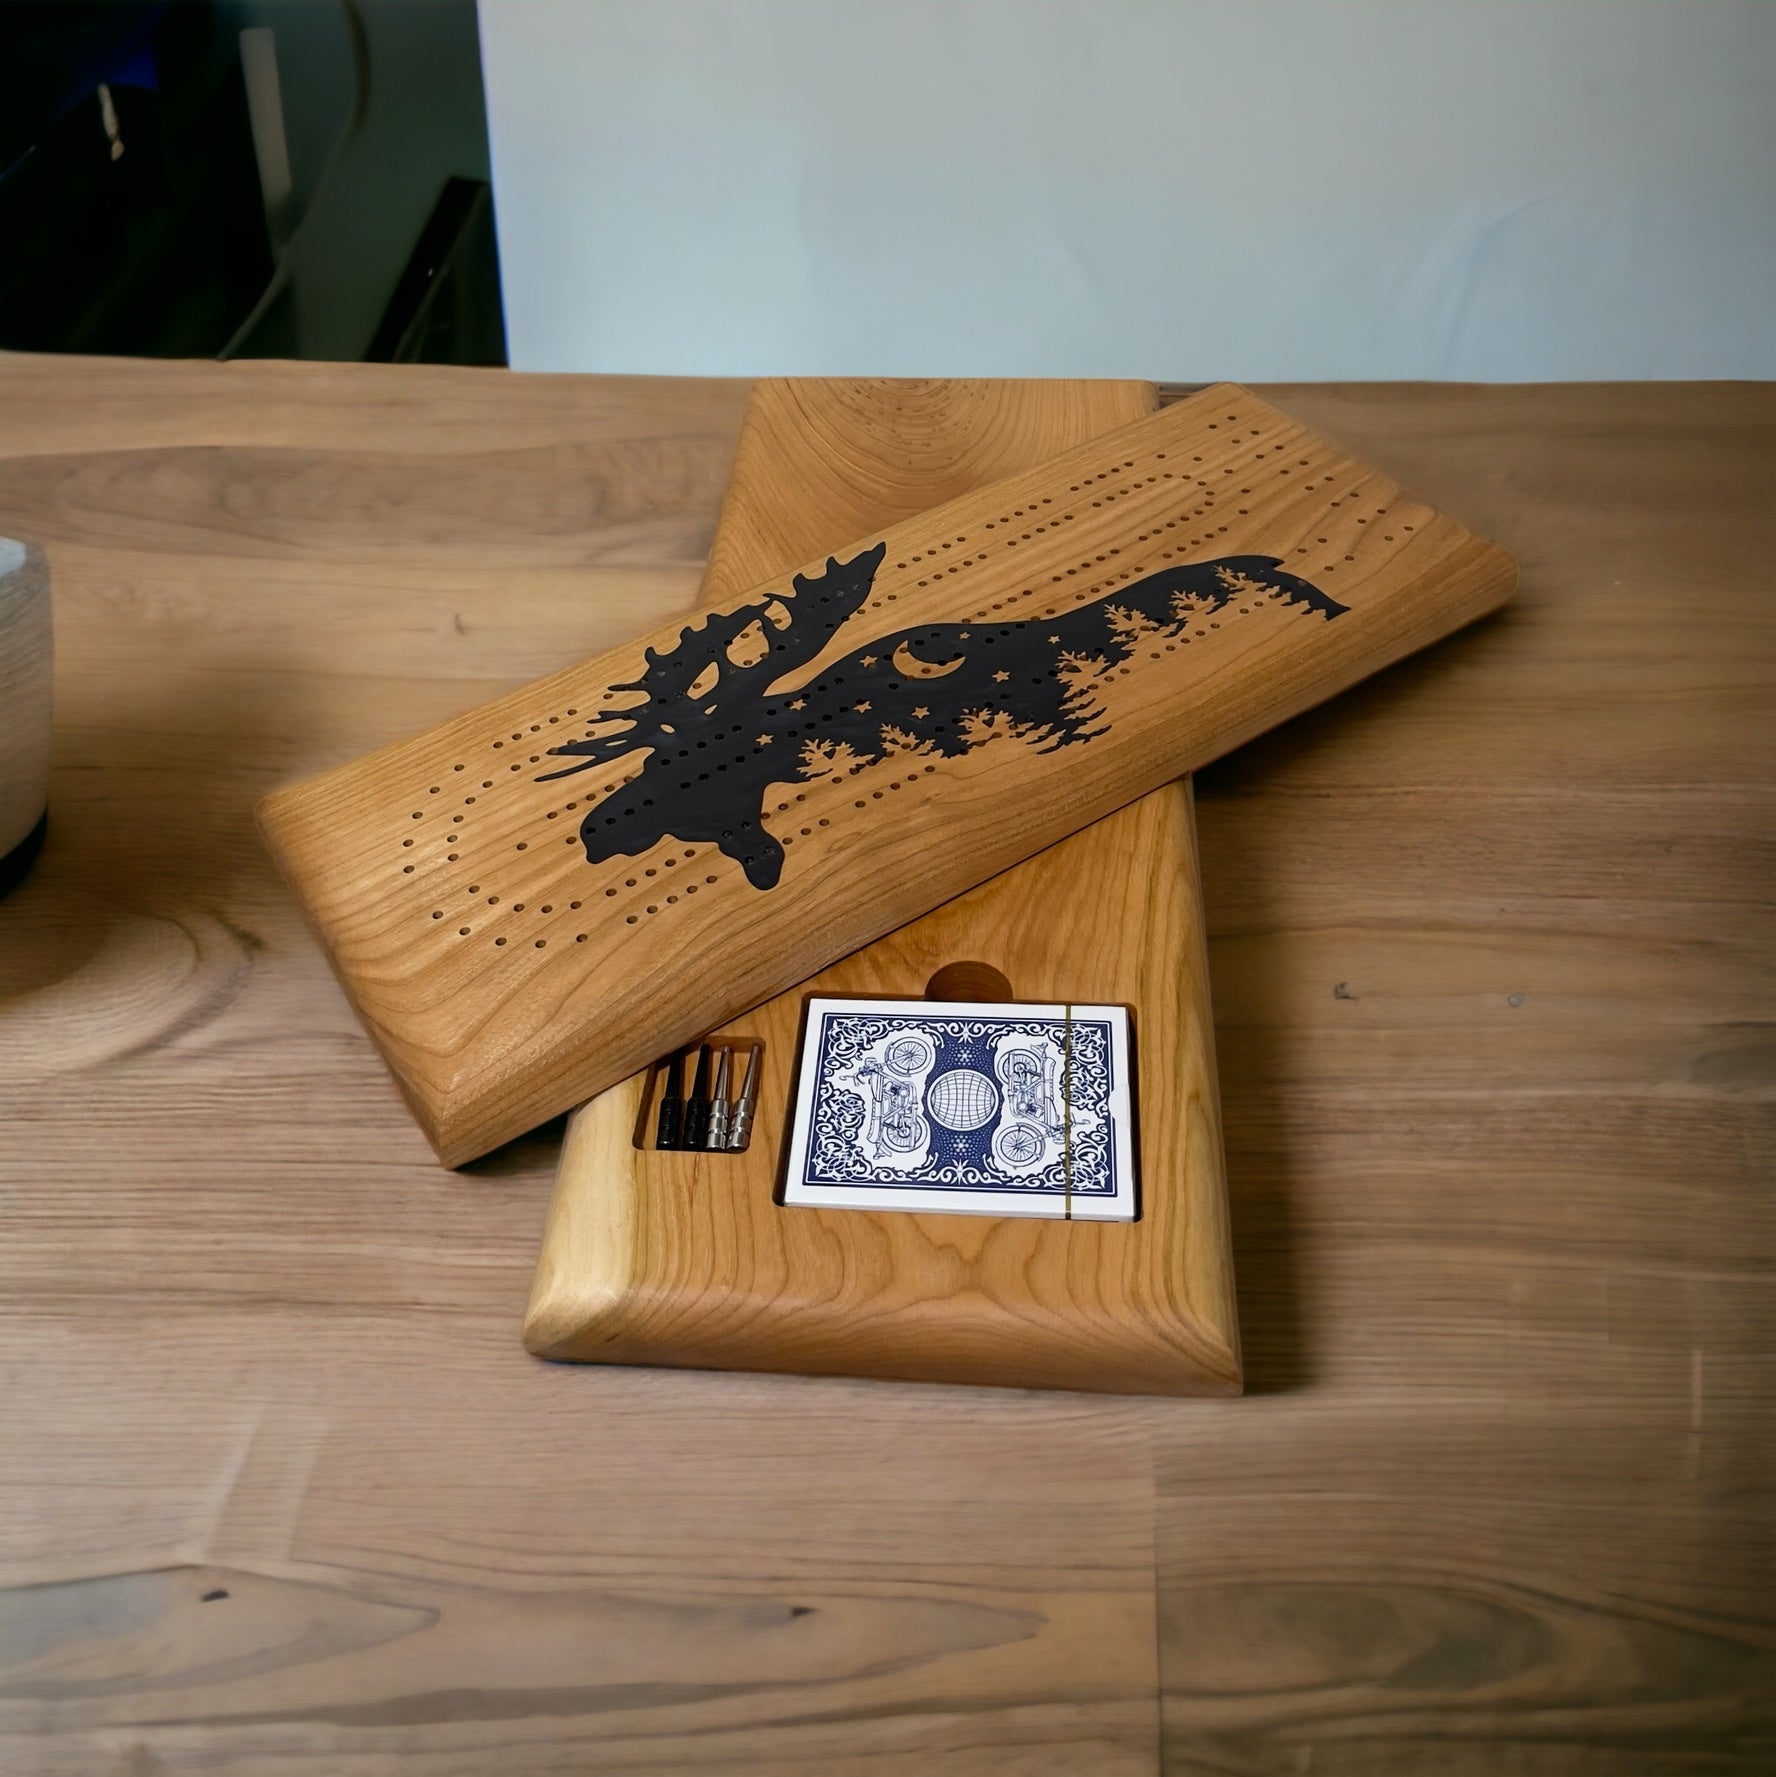 Cribbage boards - We have the wood